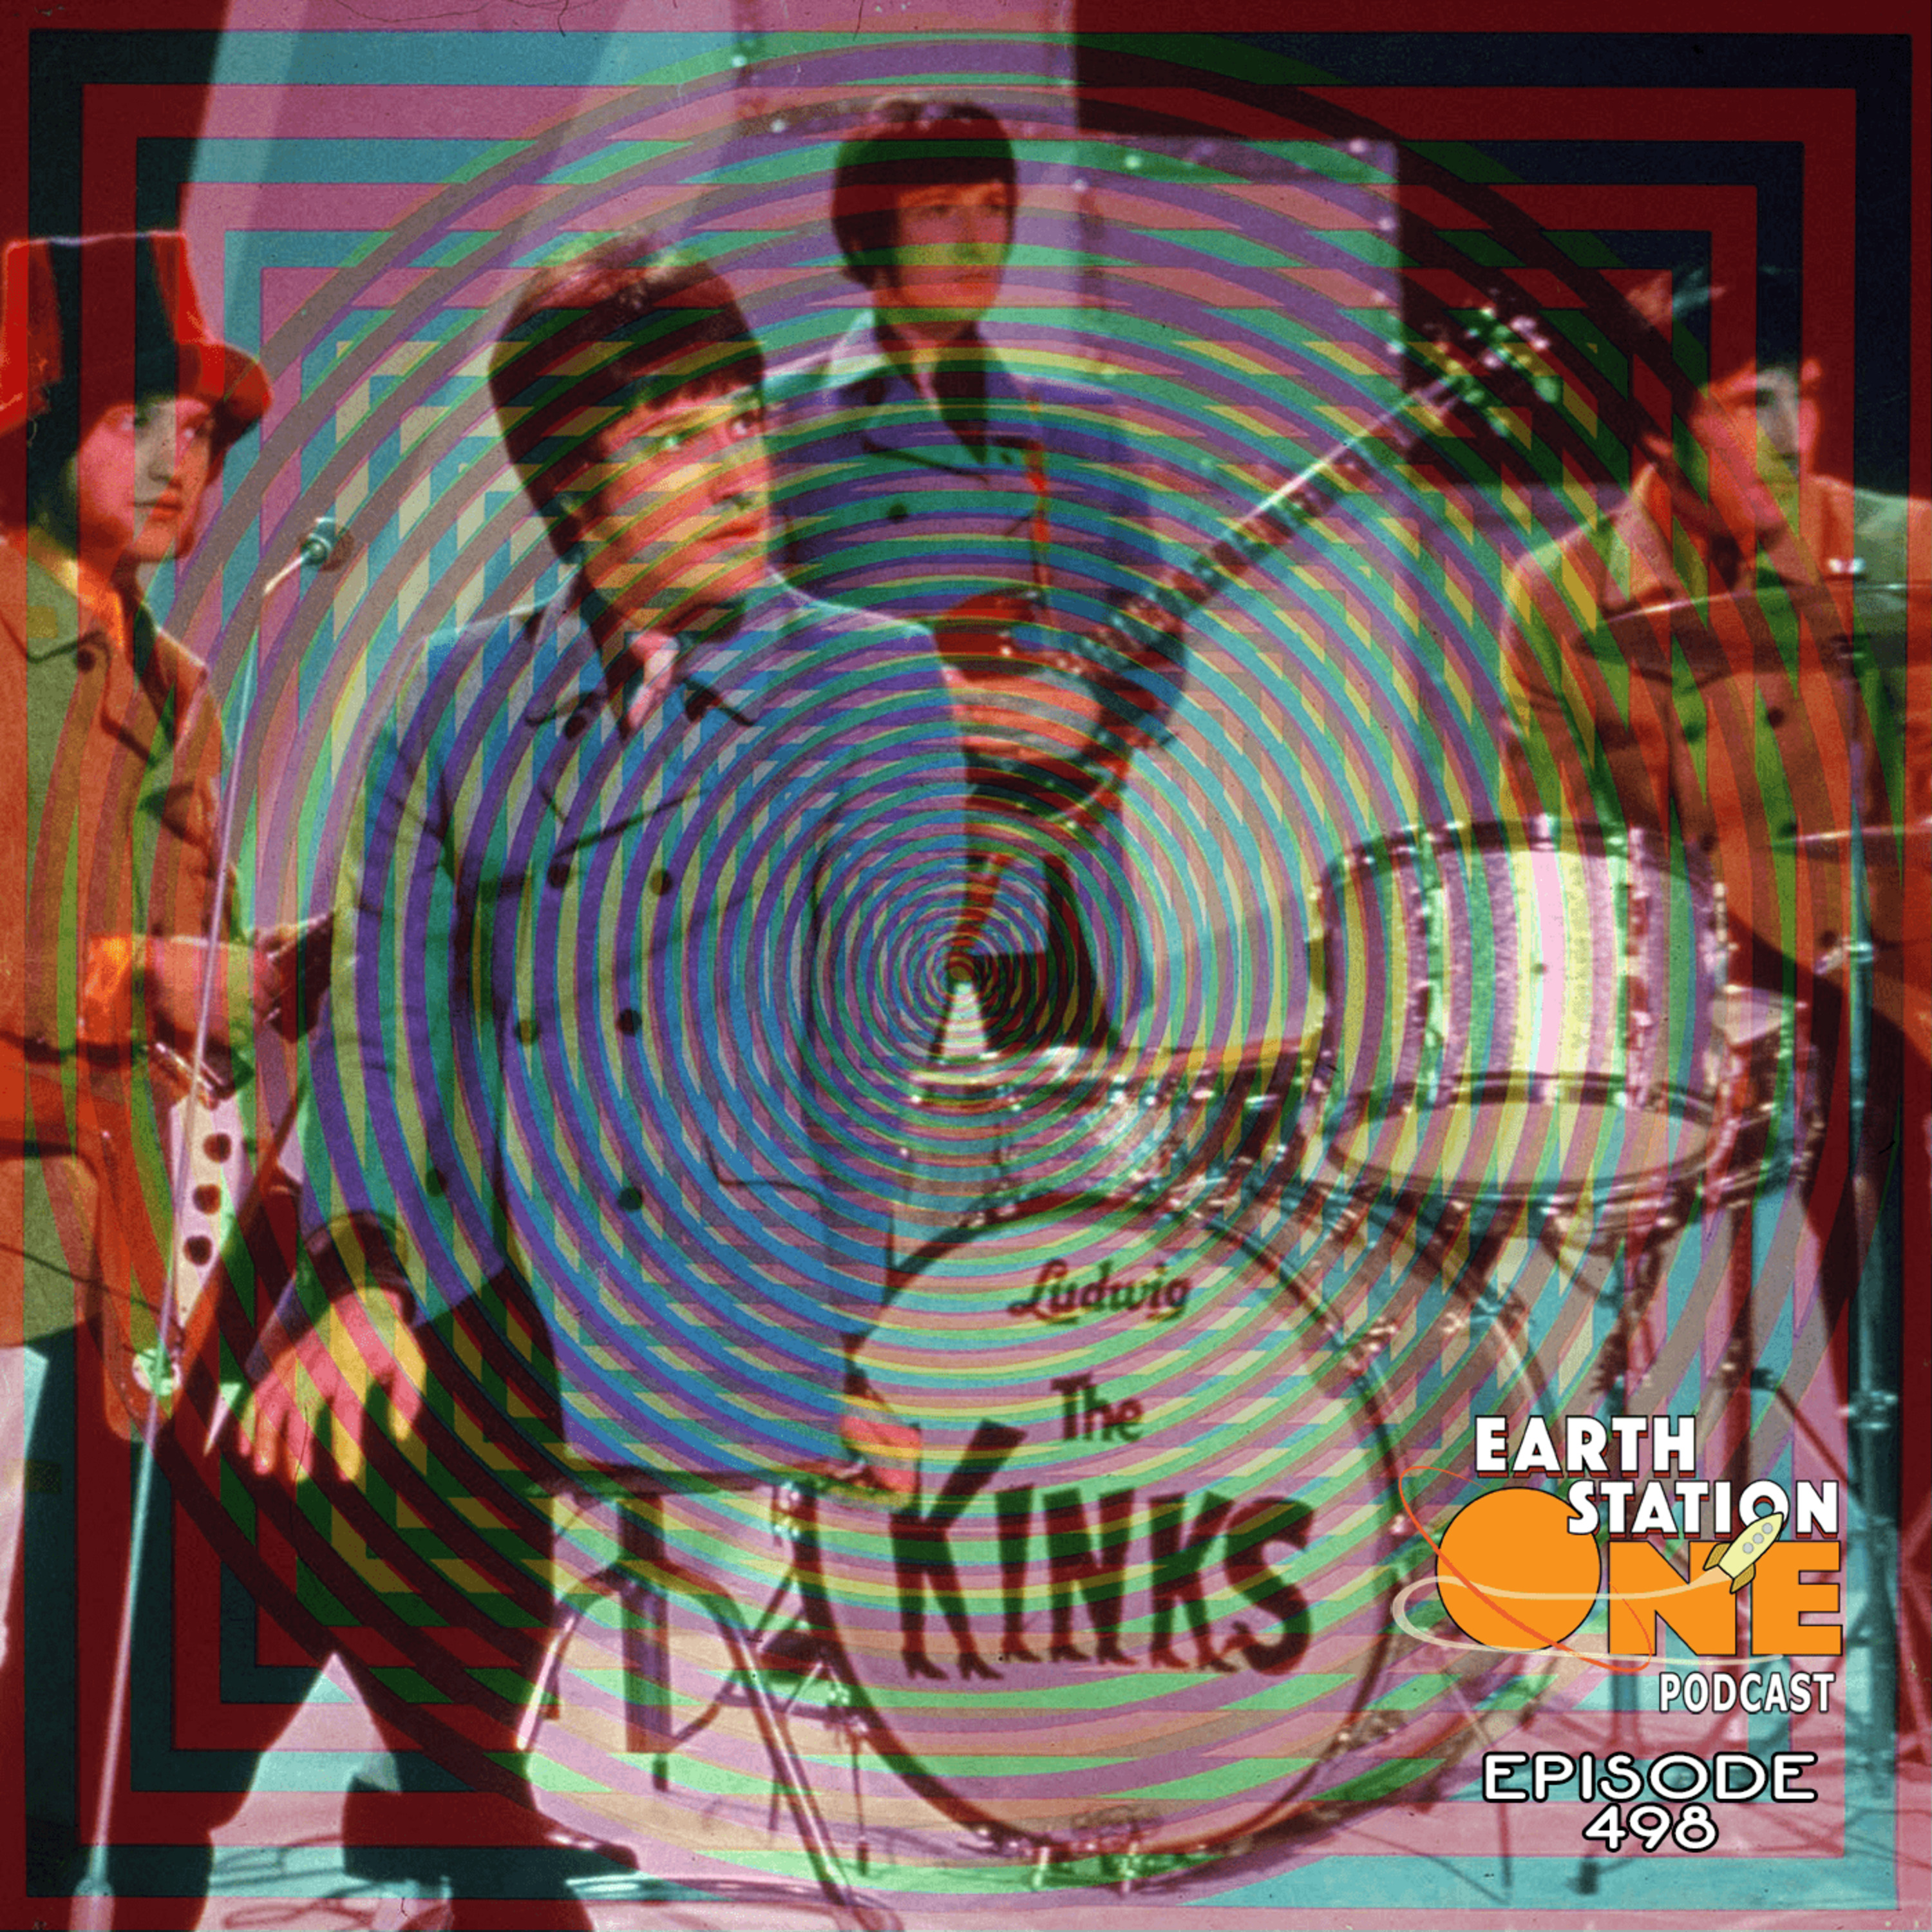 The Earth Station One Podcast – Music Spotlight On The Kinks